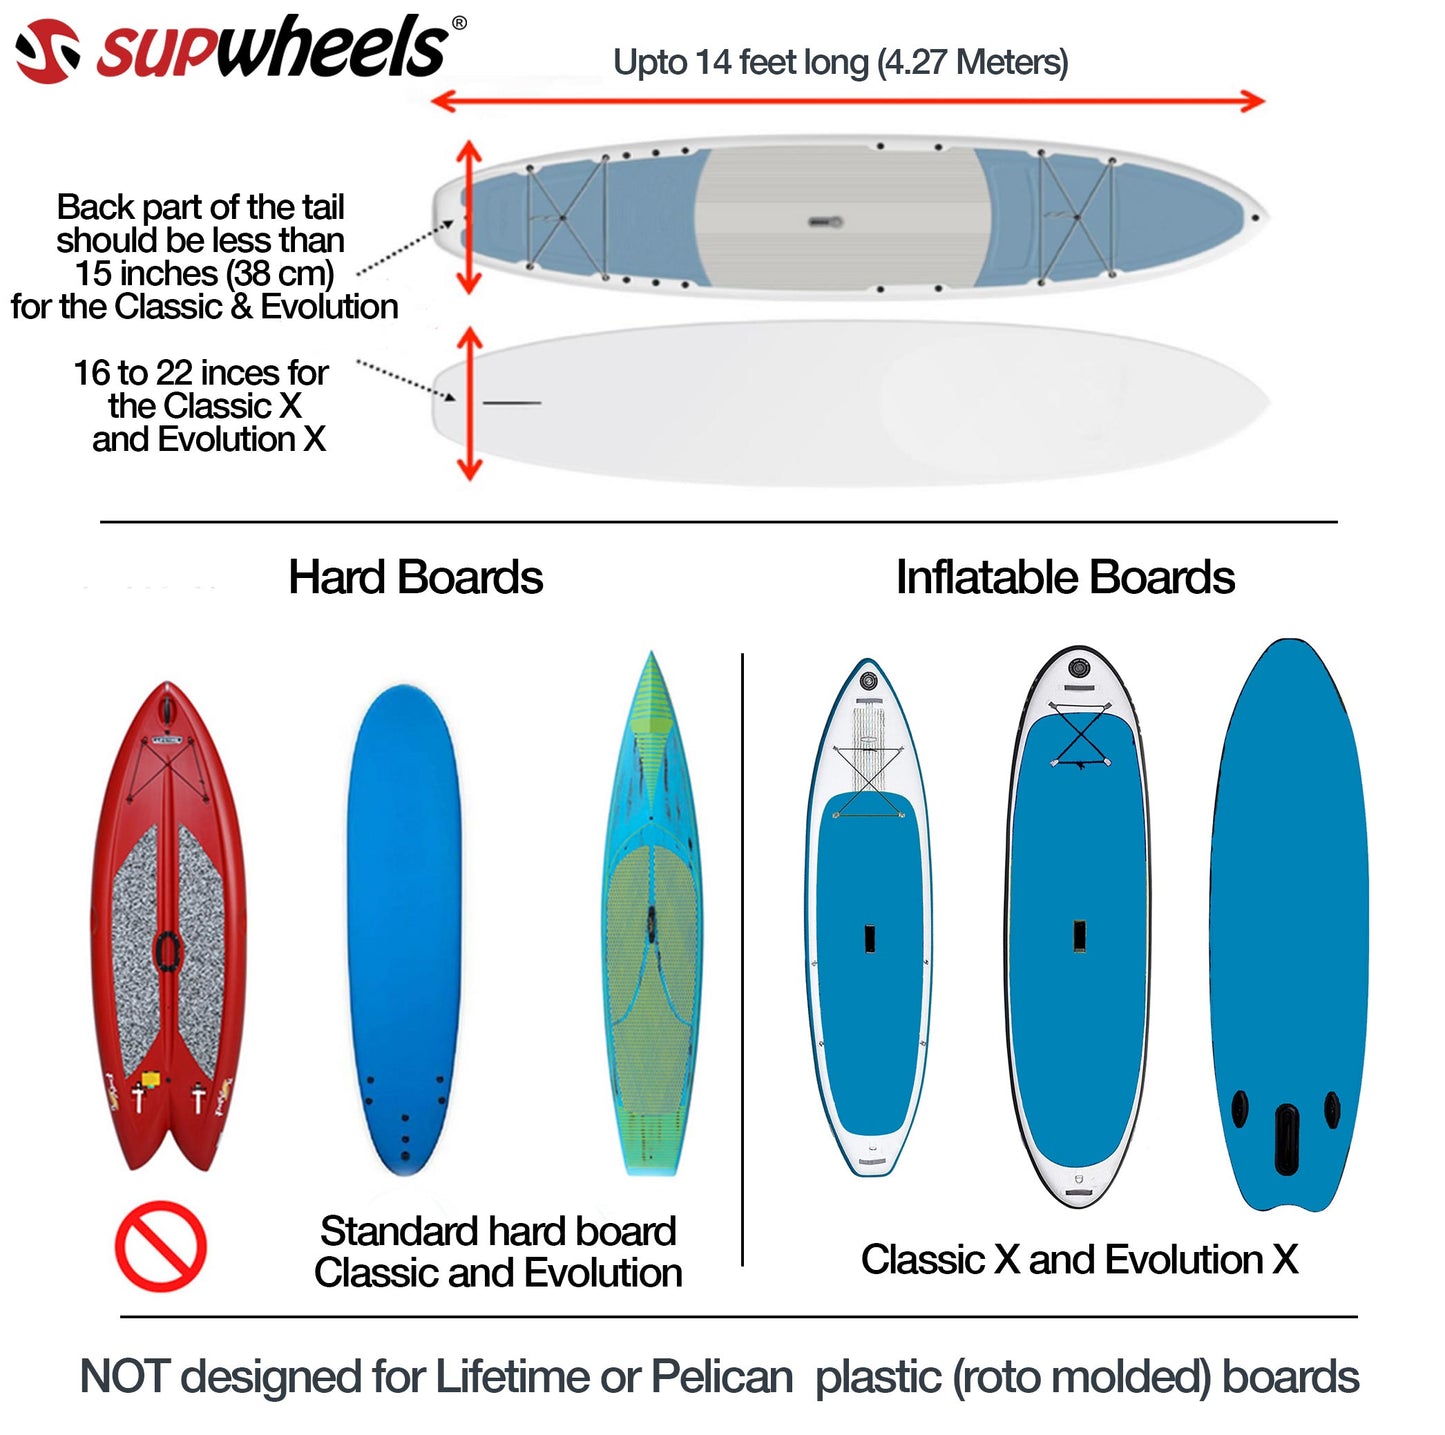 Classic-X SUP Wheels - Inflatable paddle boards walking carrier - no strap handle